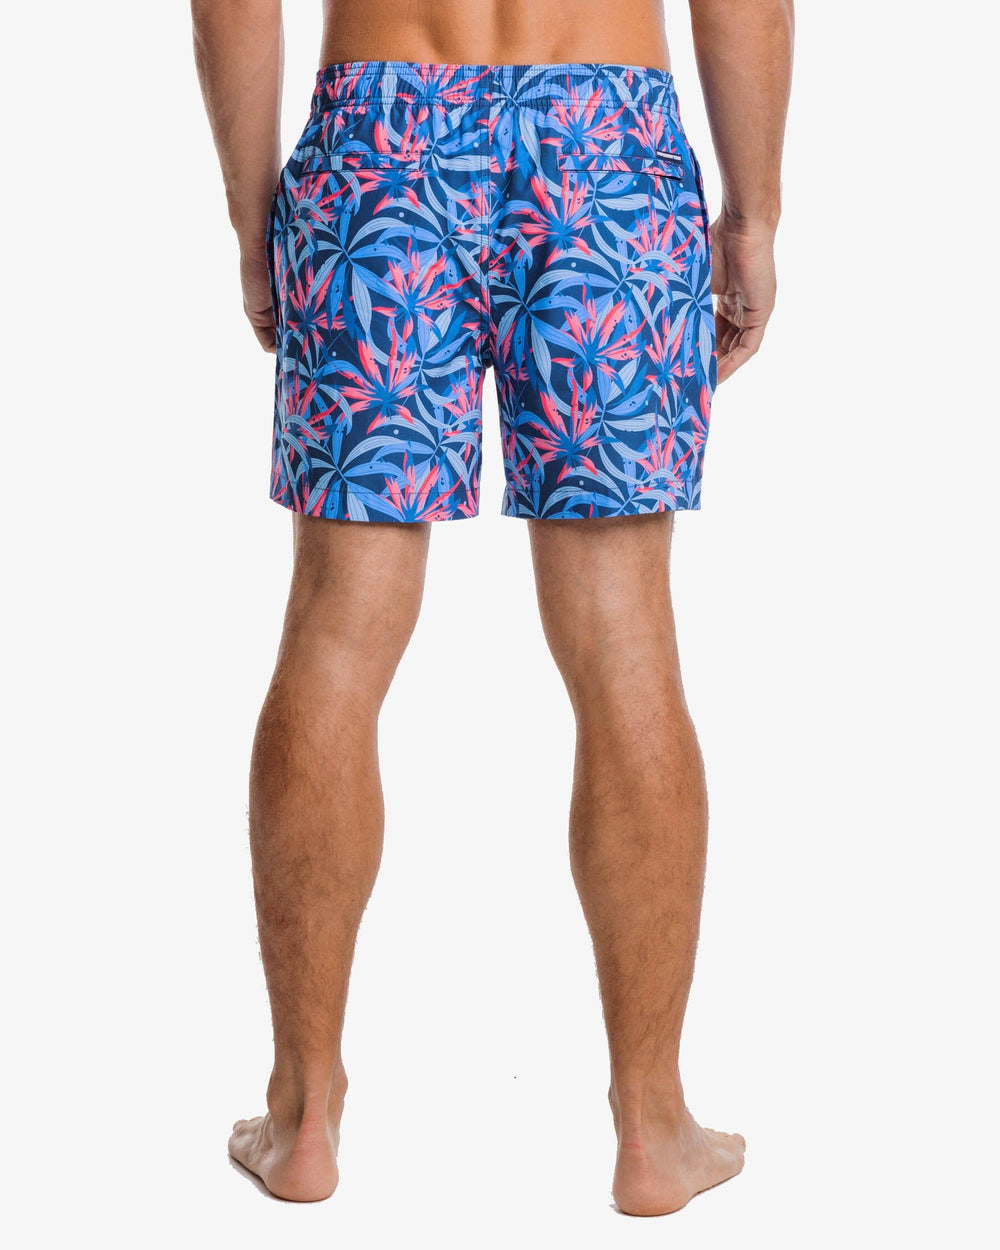 The back view of the Southern Tide Tropical Blooms Printed Swim Trunk by Southern Tide - Aged Denim